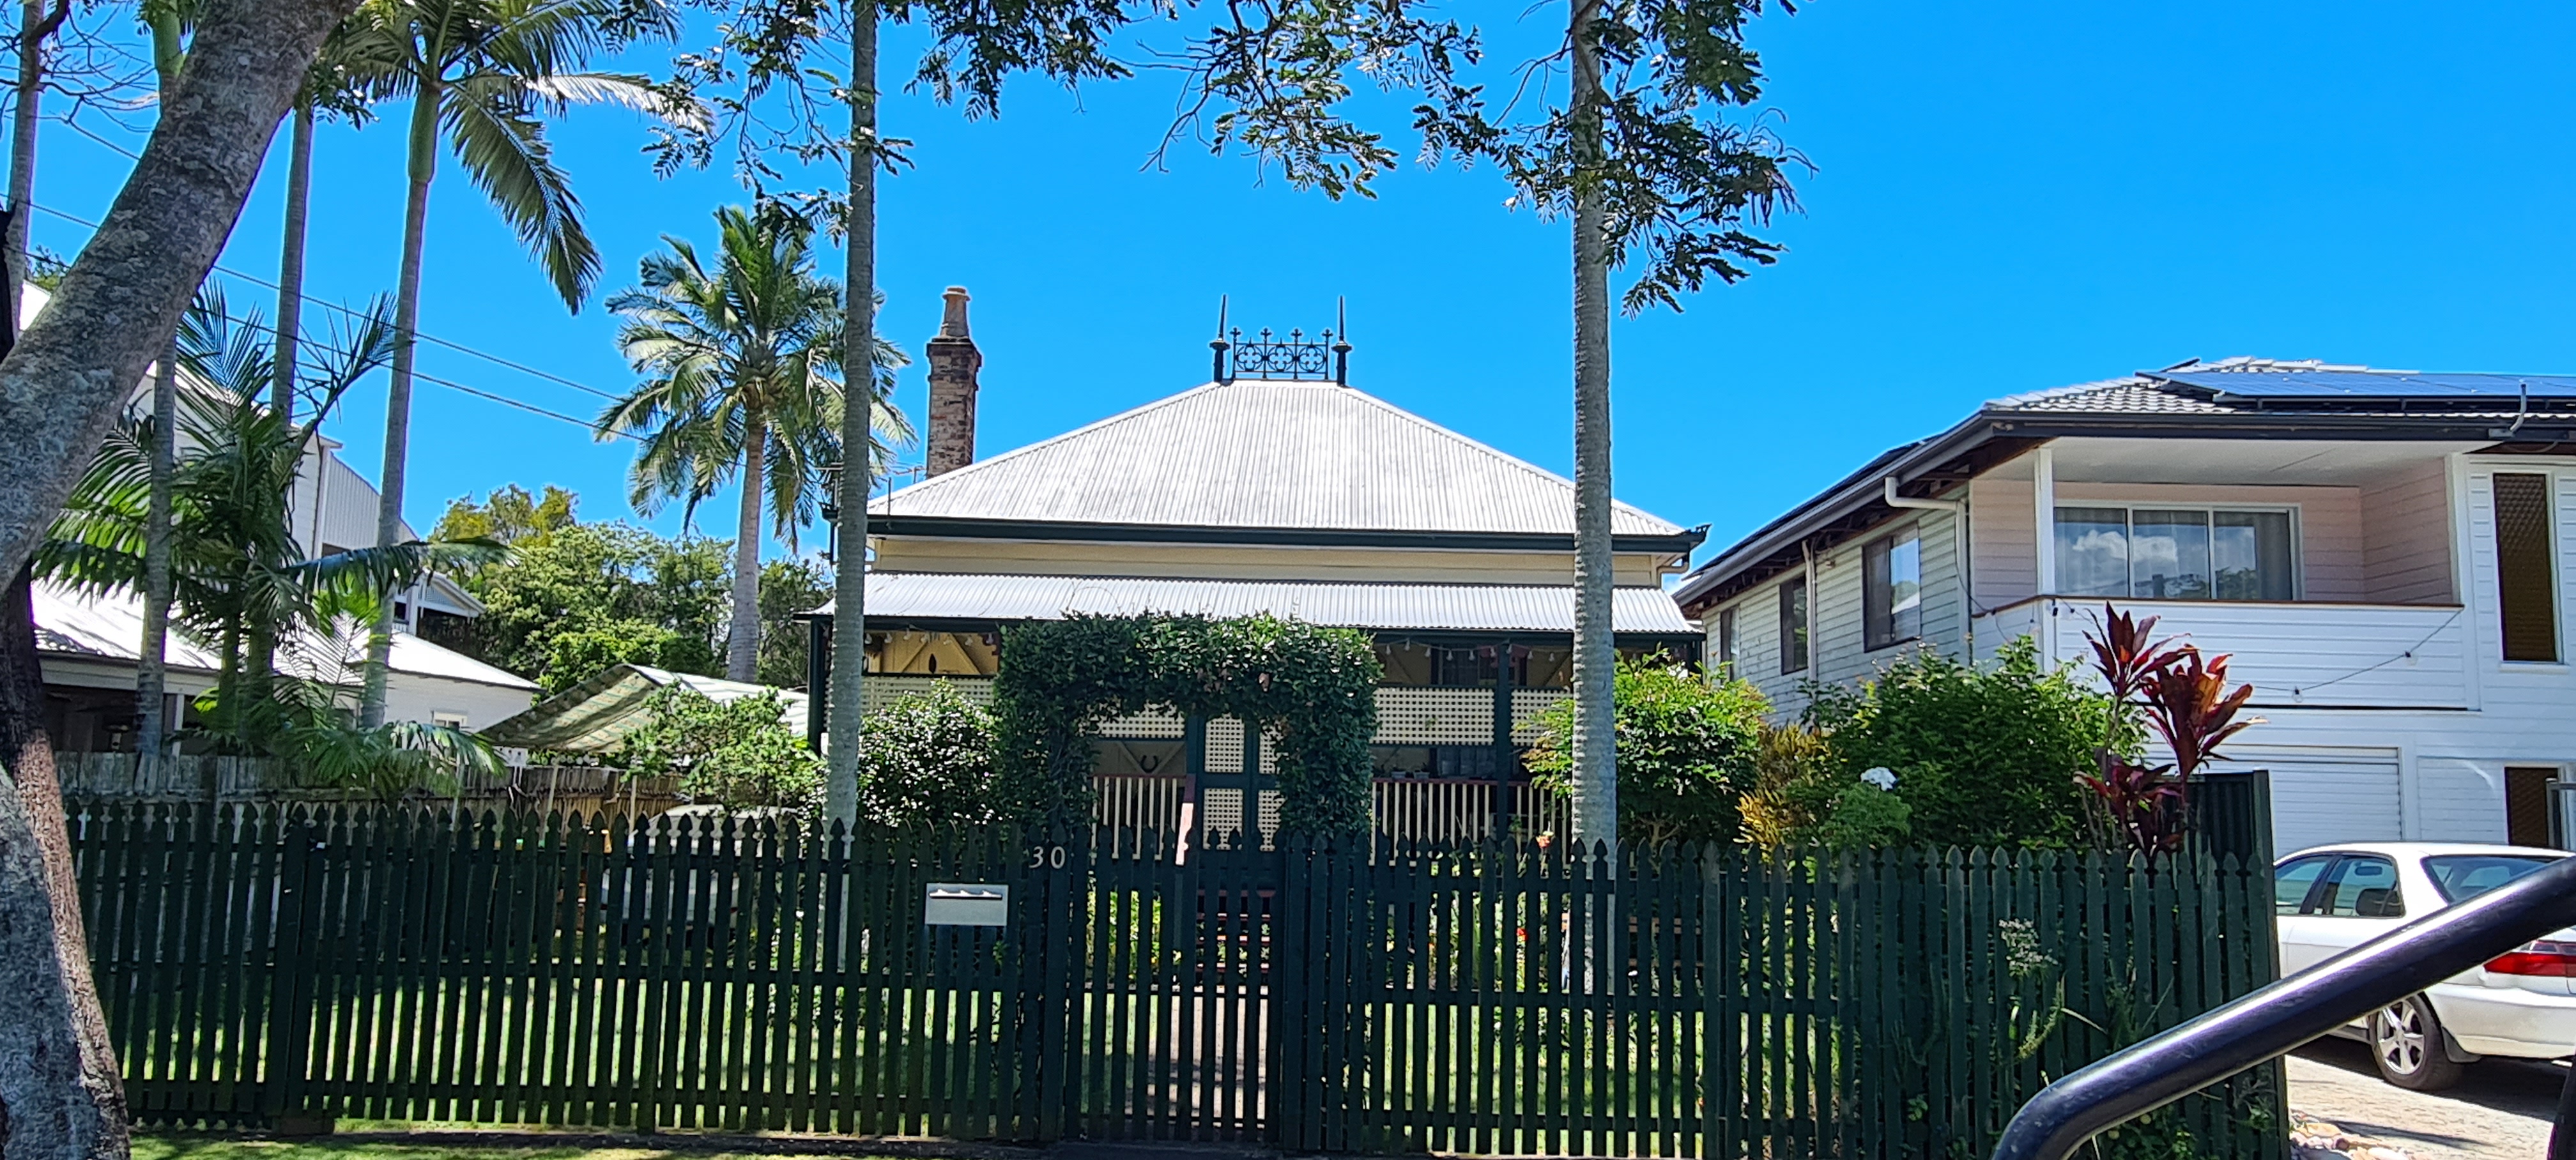 This is an image of the local heritage place known as 30 Palm Avenue, Shorncliffe